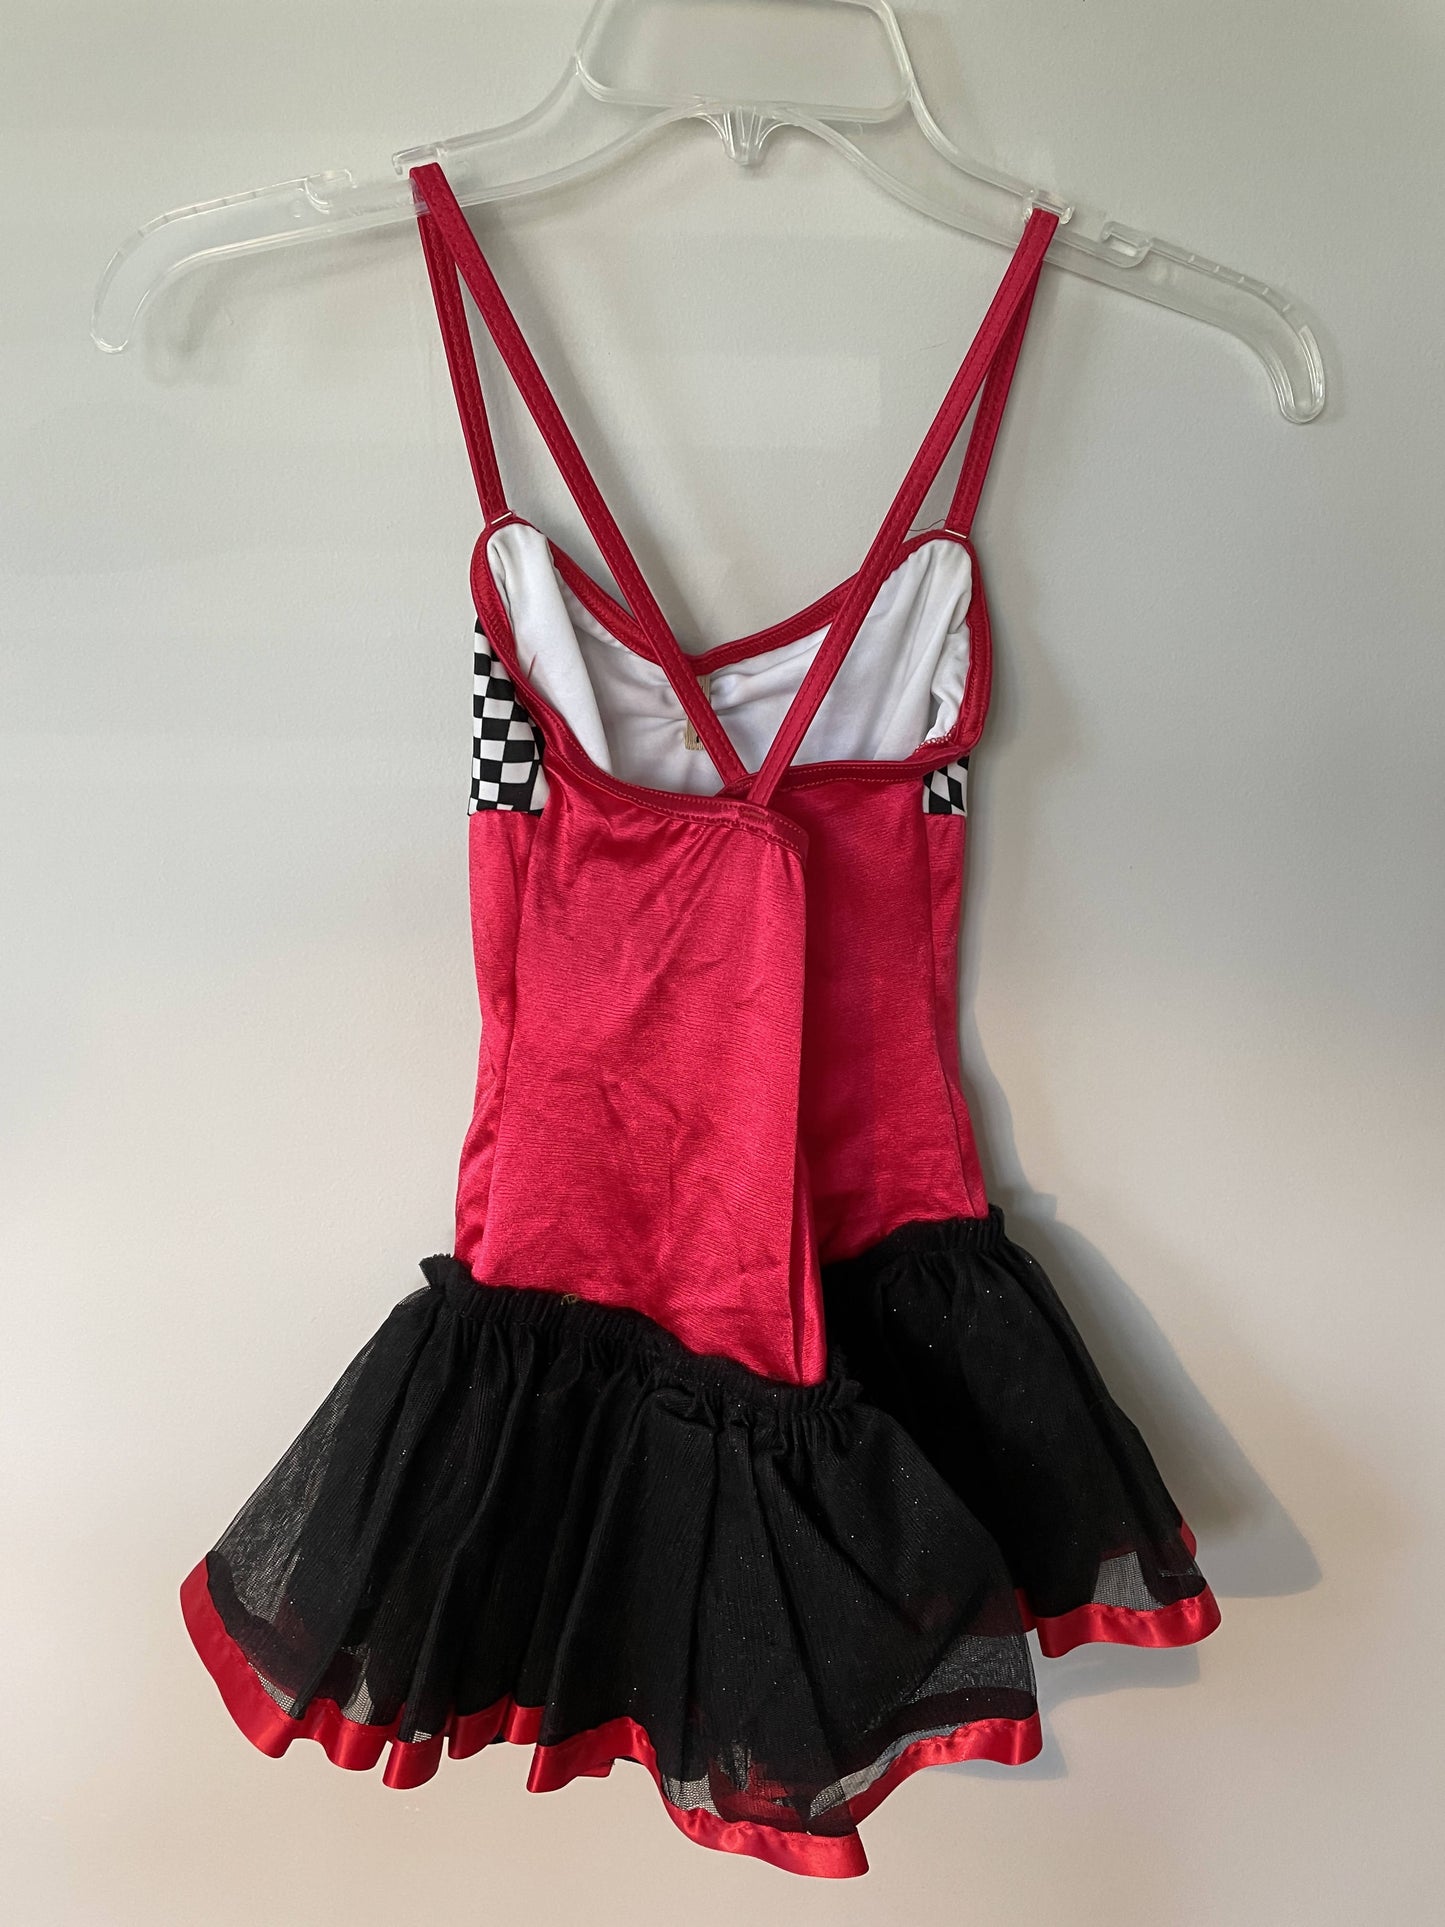 Dance dress with shorts and matching pants